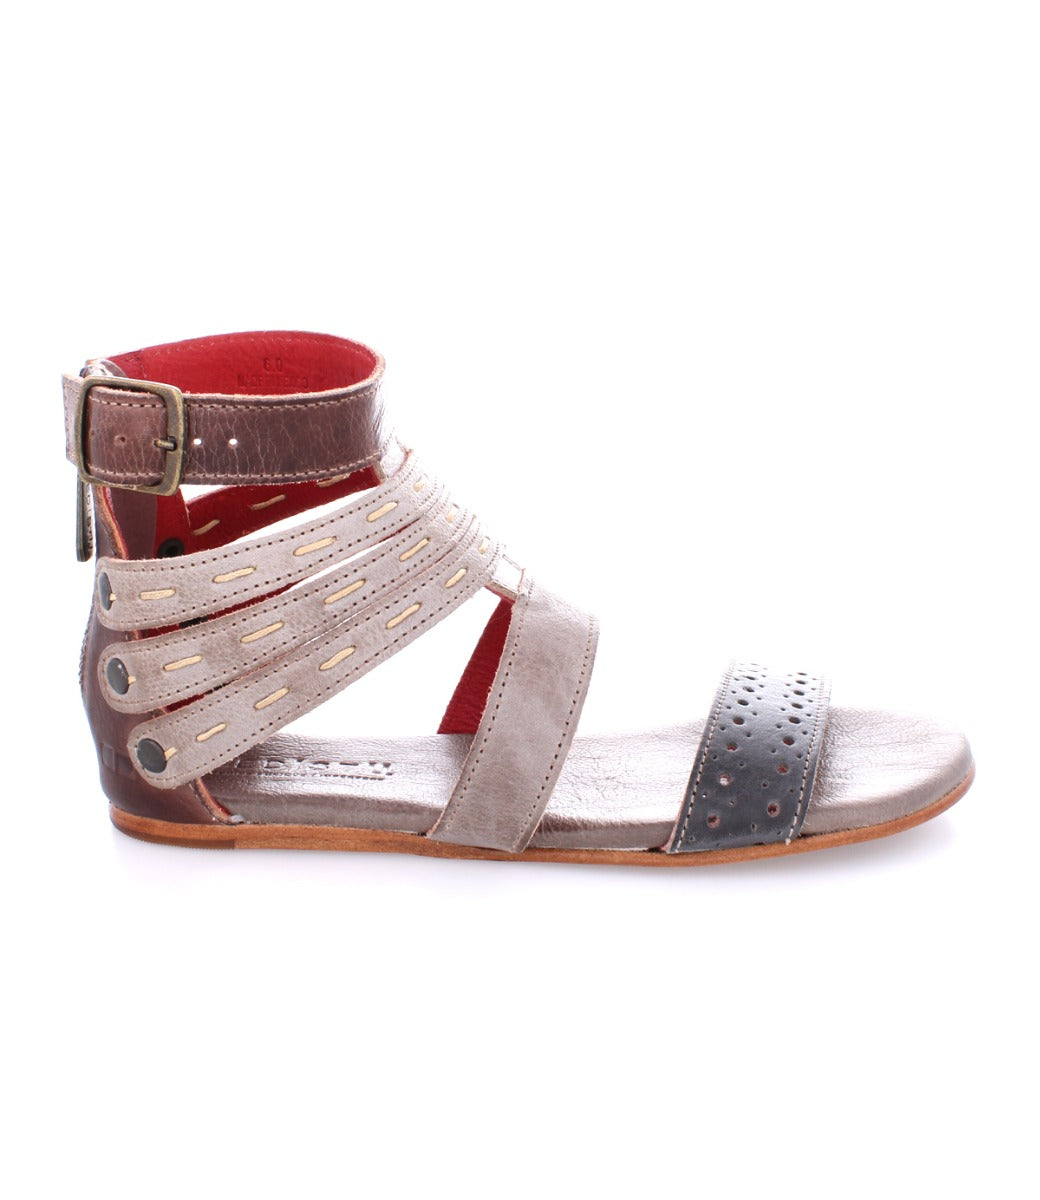 A pair of Bed Stu women's sandals with straps and buckles.